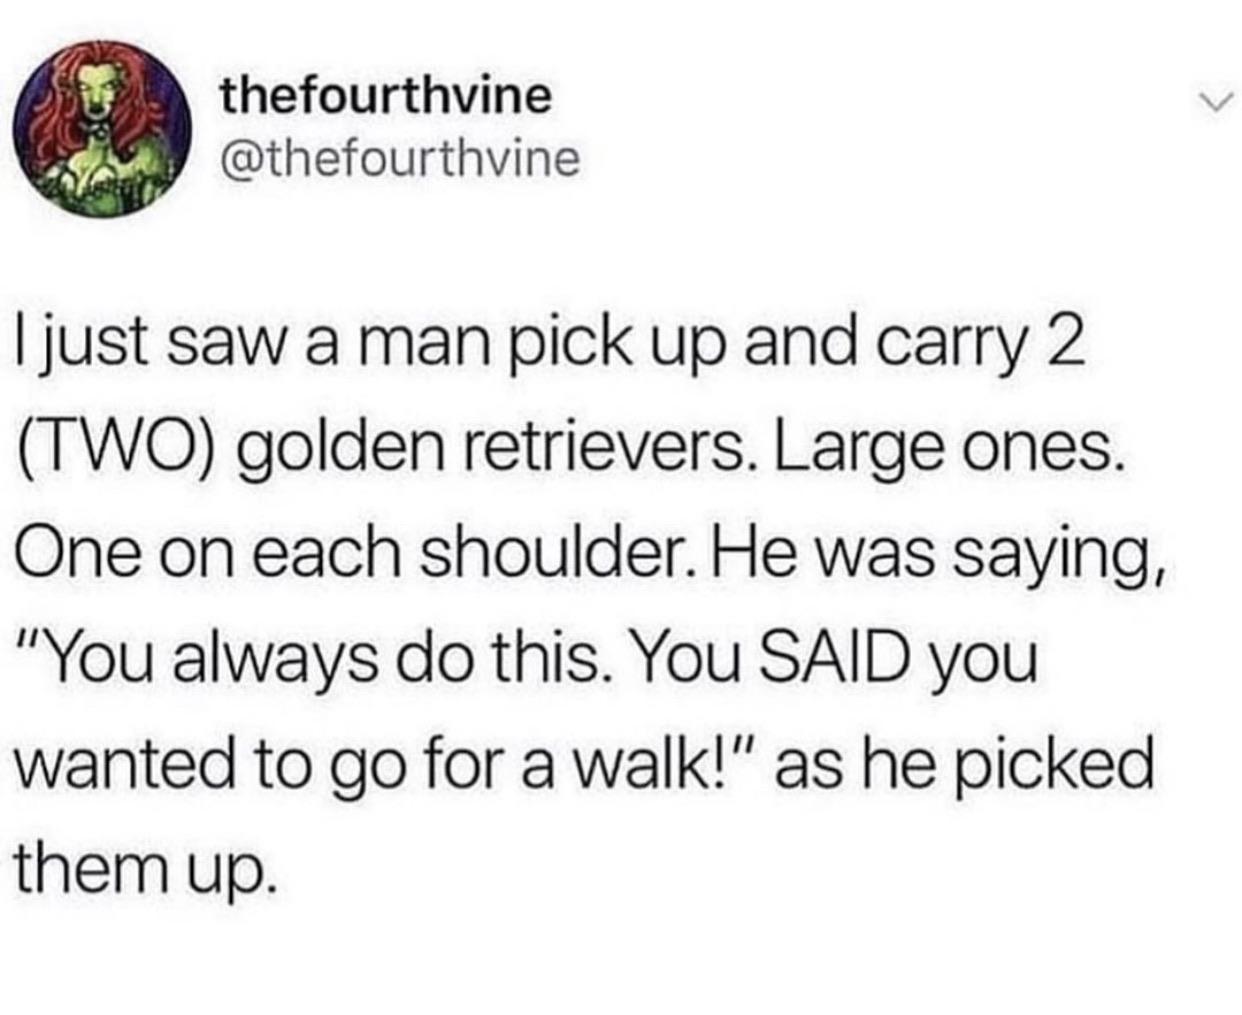 asking for a favor meme - thefourthvine I just saw a man pick up and carry 2 Two golden retrievers. Large ones. One on each shoulder. He was saying, "You always do this. You Said you wanted to go for a walk!" as he picked them up.